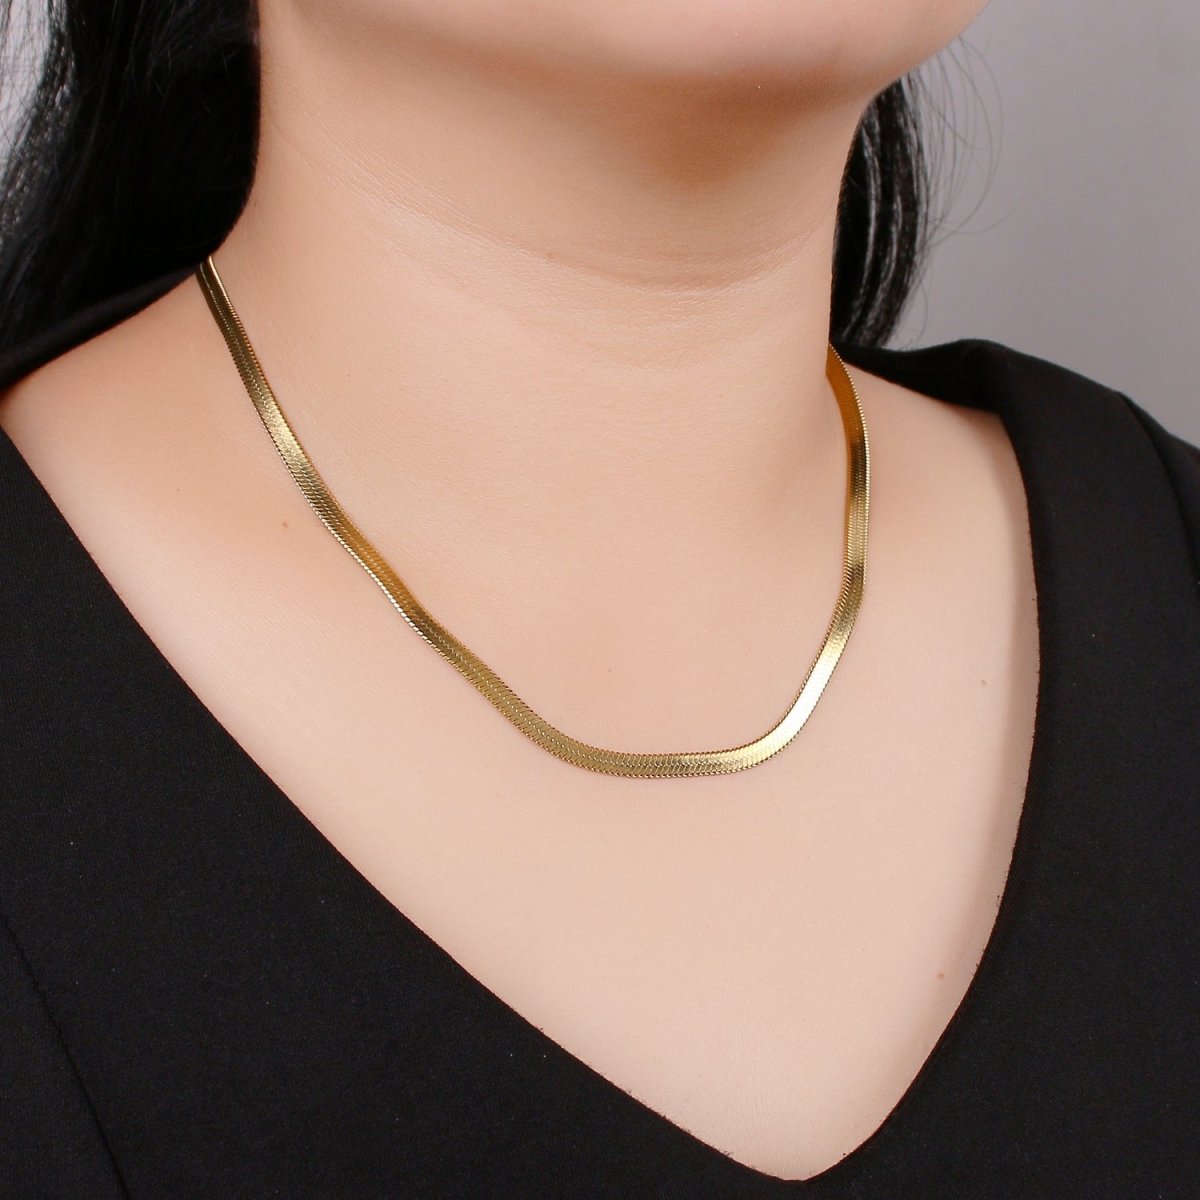 Herringbone Chain Necklace | 24K Gold Plated Herringbone Chain, Layered Necklace, Flat Snake Chain, Skinny Gold Chain Everyday Wear | Stainless Steel, Gold Plated | 17.5", 17.8", 18" | 2.5mm, 3mm, 4.3mm | CN-915 916 917 918 Clearance Pricing - DLUXCA